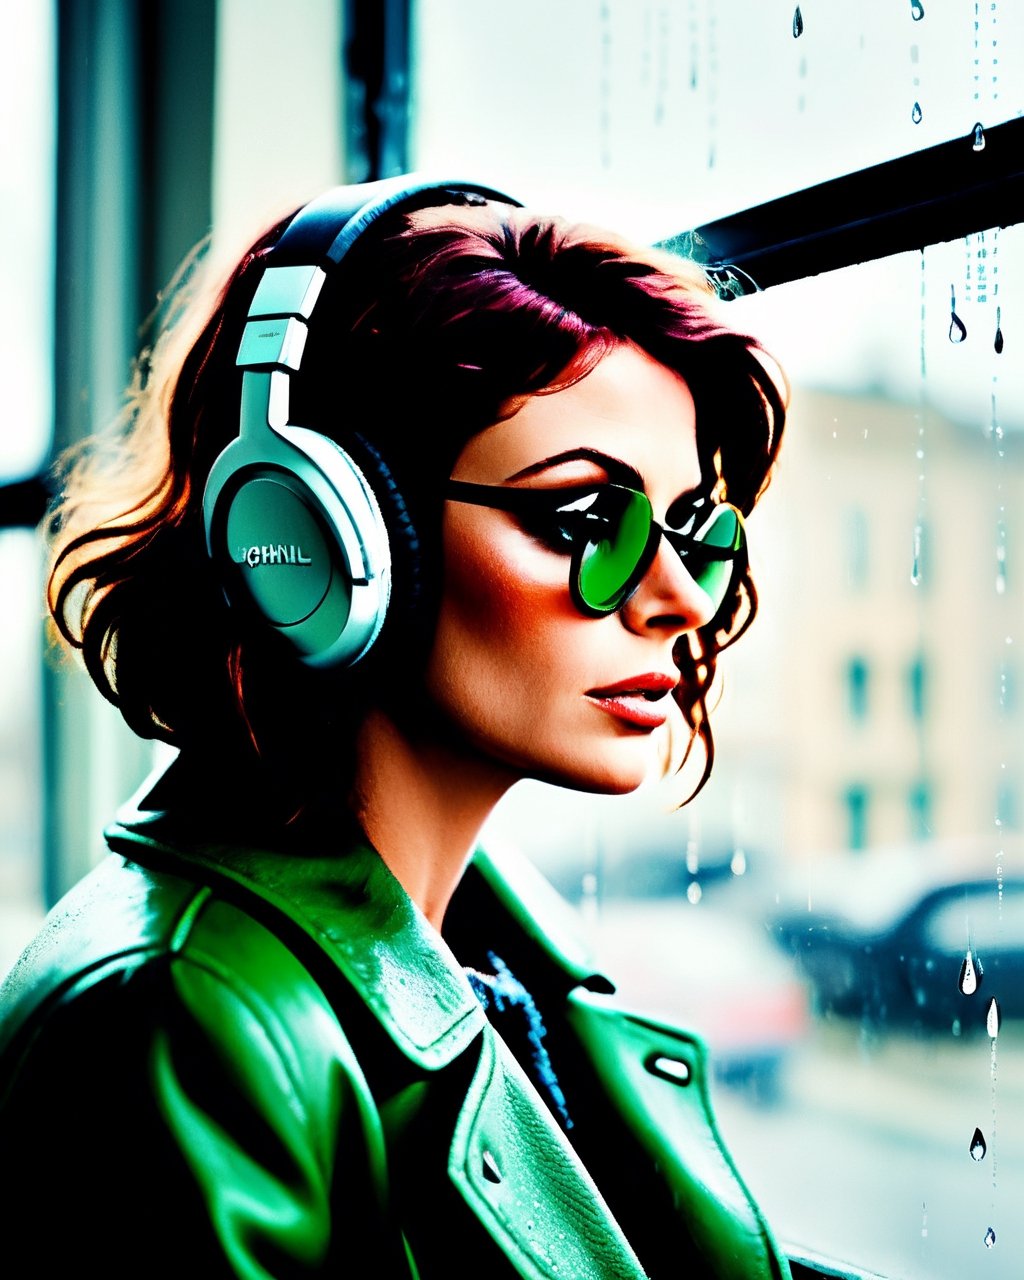 (masterpiece, photo-realistic, moody:1.5), a captivating portrayal of a girl [Sophia Loren:Mause Adams:0.45] with a chic black chanel bob, mesmerizing green eyes, and cute freckles on her cheeks, (lost in the world of music as she wears wifi headphones:1.5), her head resting against the windowpane, wearing a colorful winter coat, (a hint of melancholy reflected in her expression:1.3), raindrops decorating the window, with a soft, dim light illuminating the scene, (evoking a sense of introspection and emotion:1.3), Cinematic, Hyper-detailed, insane details, Beautifully color graded, Unreal Engine, DOF, Super-Resolution, Megapixel, Cinematic Lightning, Anti-Aliasing, FKAA, TXAA, RTX, SSAO, Post Processing, Post Production, Tone Mapping, CGI, VFX, SFX, Insanely detailed and intricate, Hyper maximalist, Hyper realistic, Volumetric, Photorealistic, ultra photoreal, ultra-detailed, intricate details, 8K, Super detailed, Full color, Volumetric lightning, HDR, Realistic, Unreal Engine, 16K, Sharp focus, Octane render --v testp